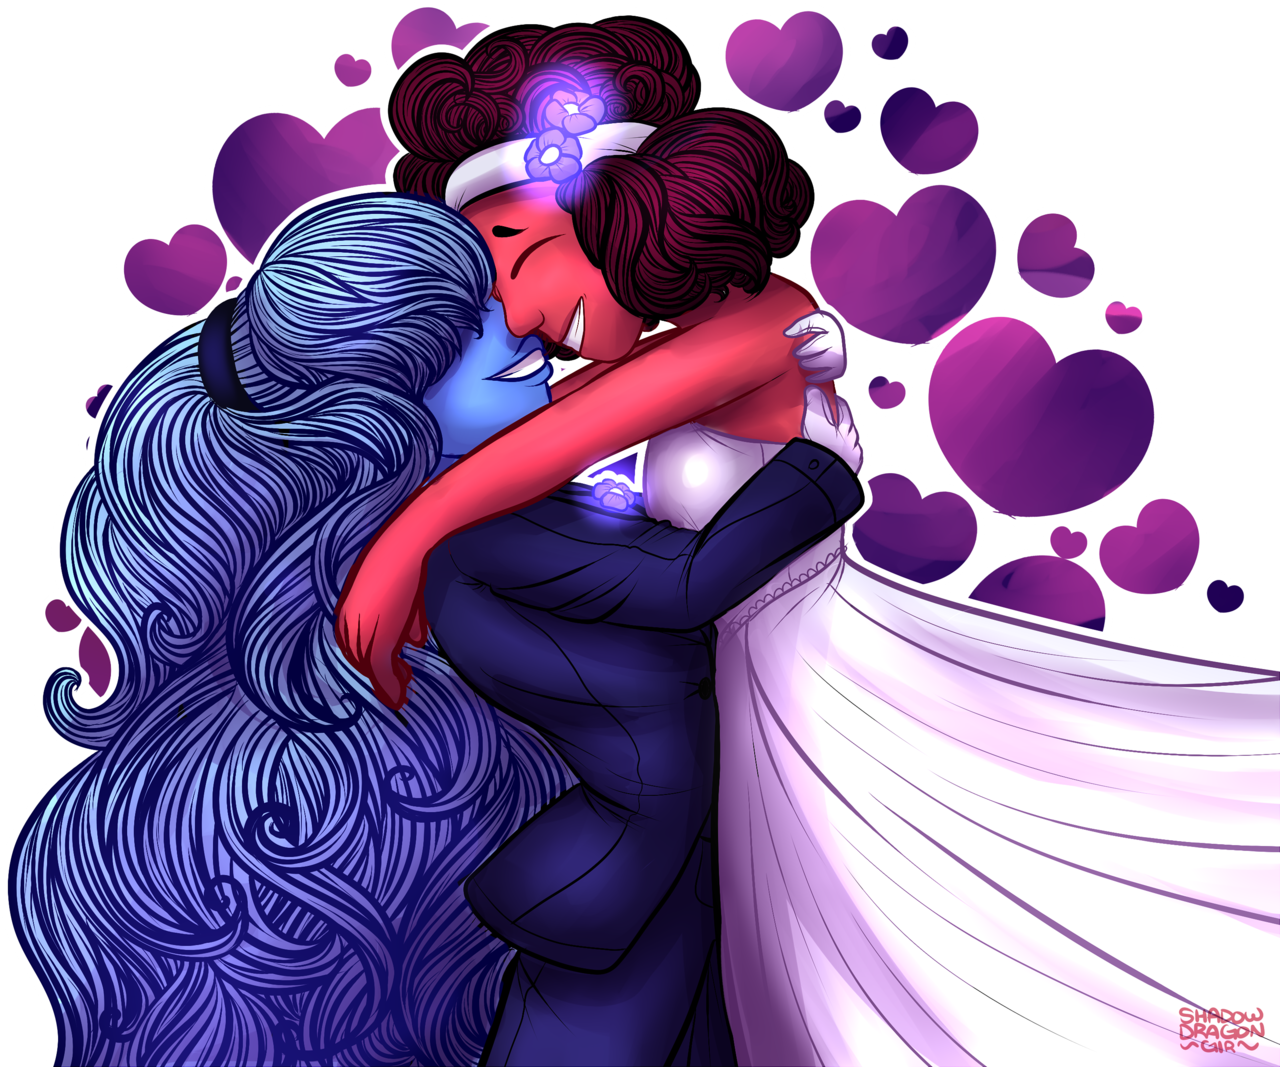 Ruby and Sapphire - Wedding!